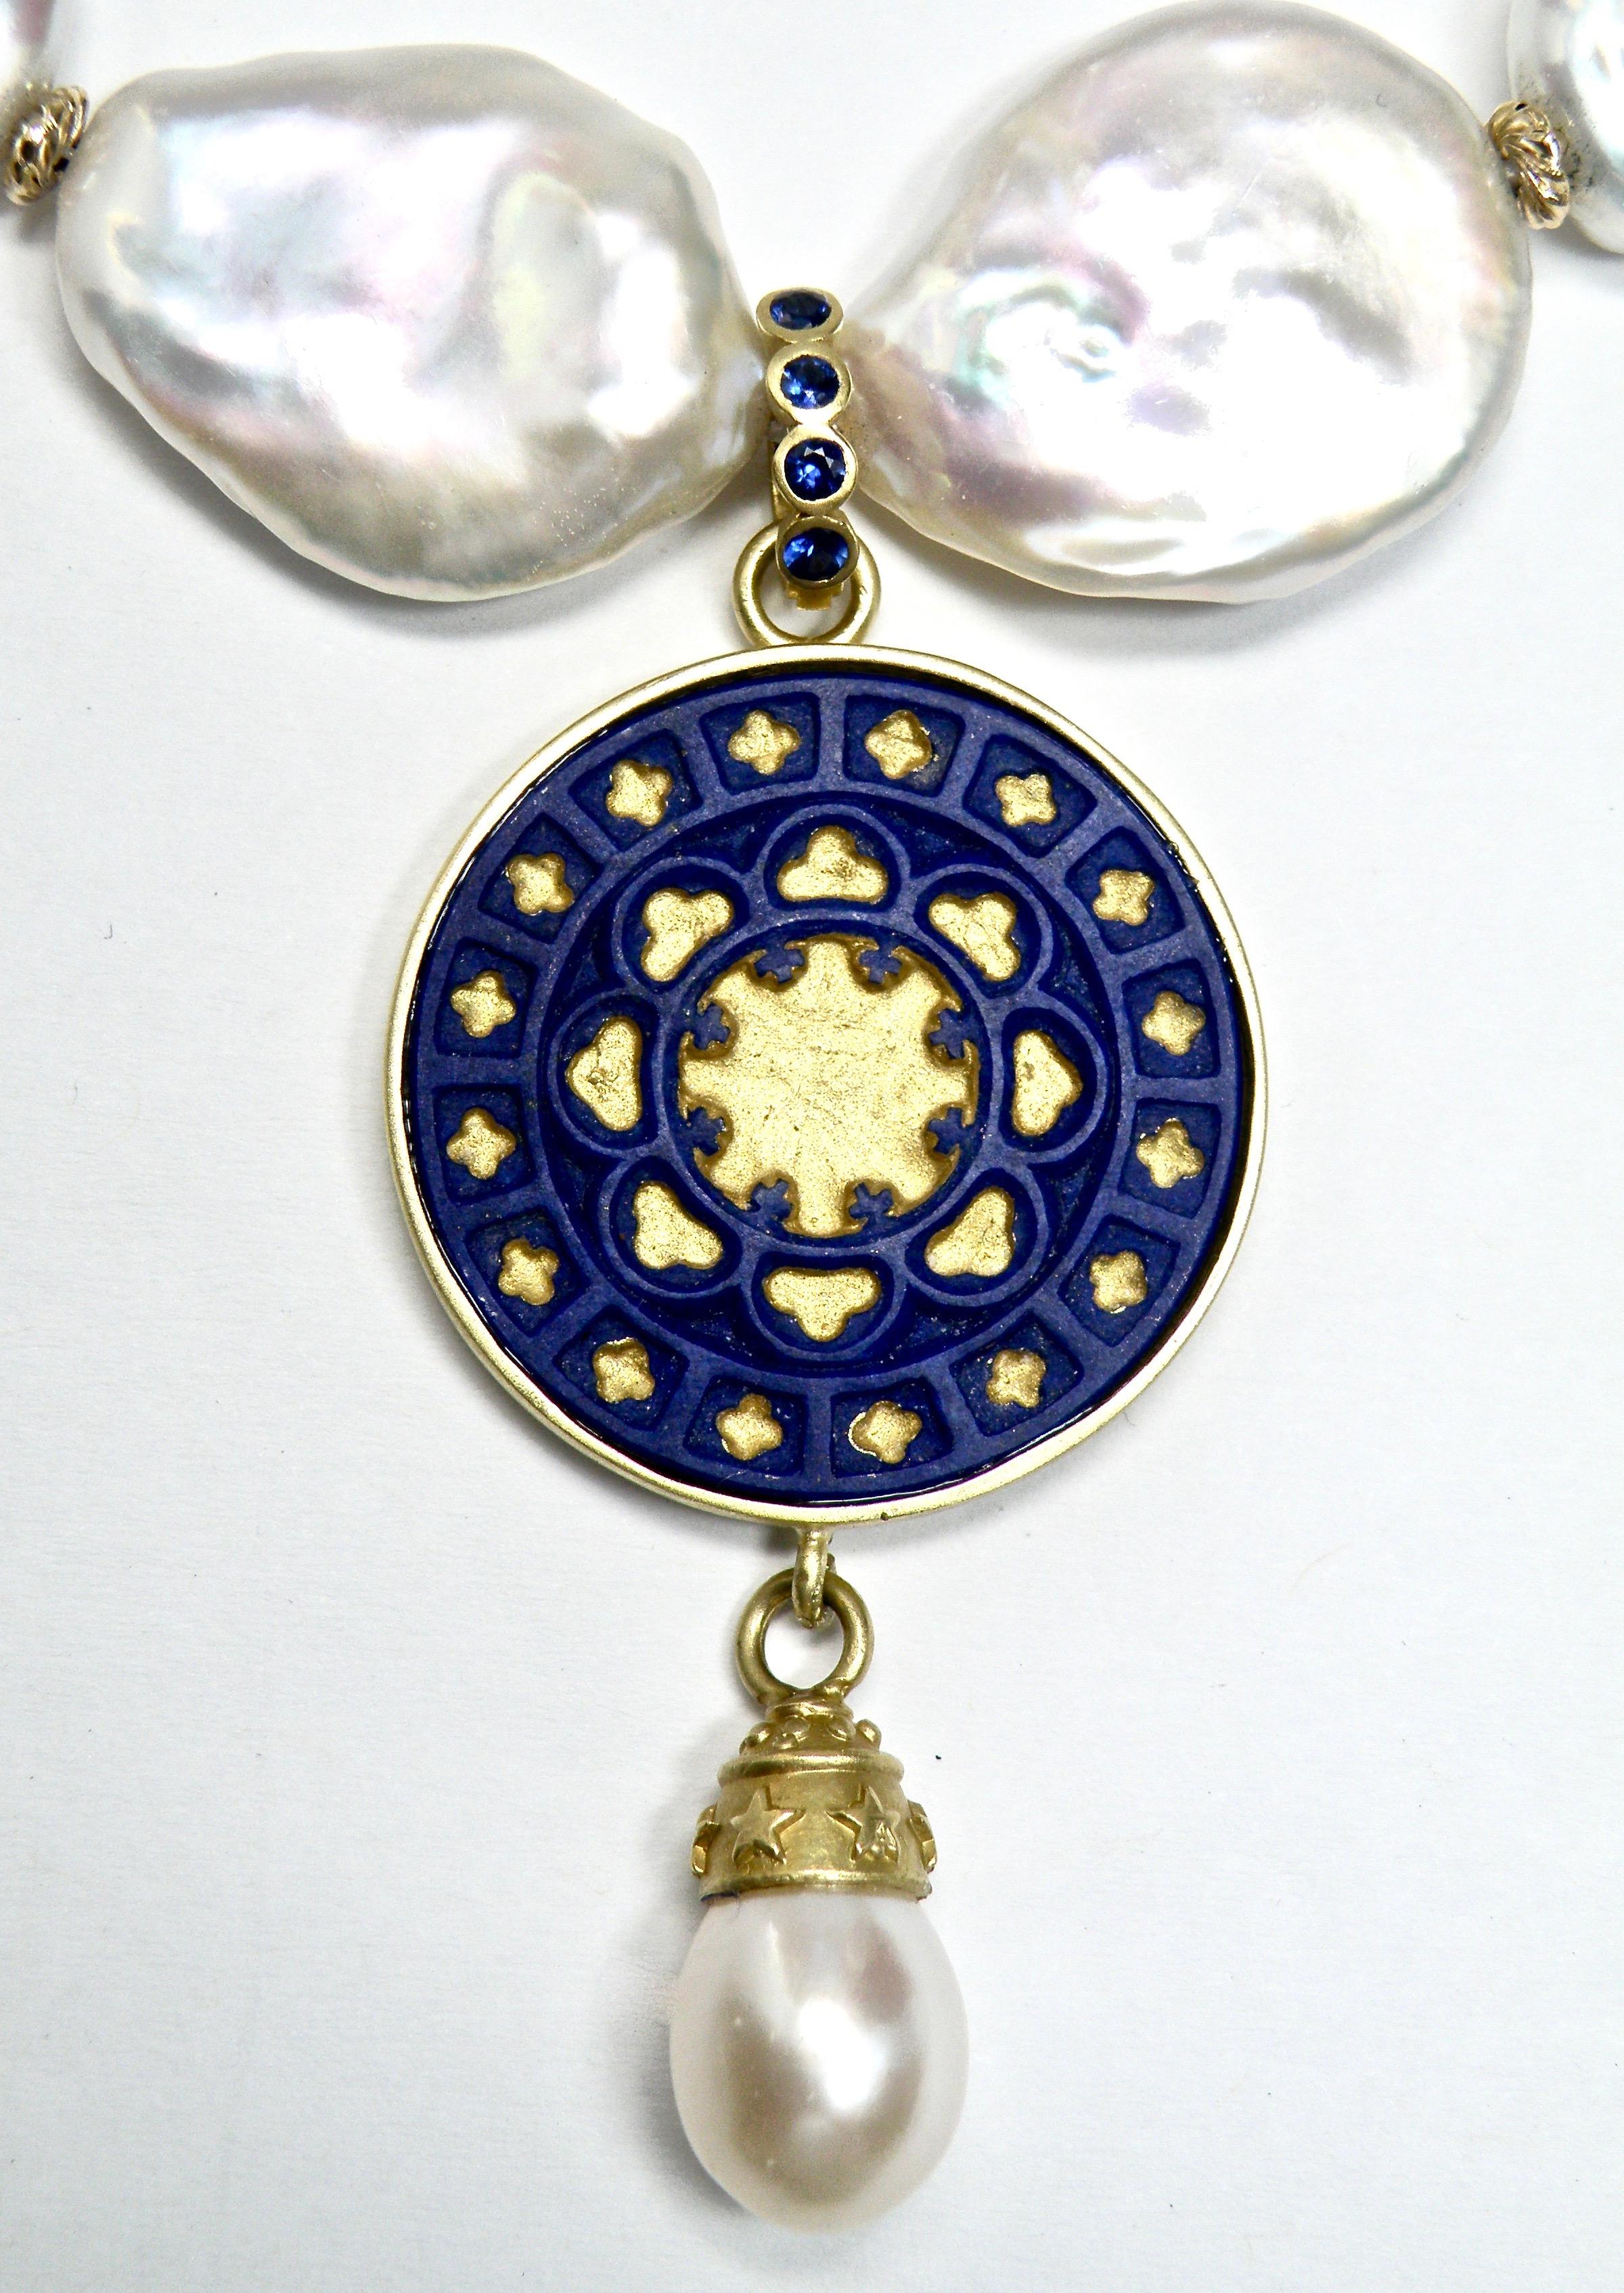 18 Karat Carved Stained Glass Window Designed Pendant in Carved Lapis Lazuli Inlay with South Sea Pearl Drop